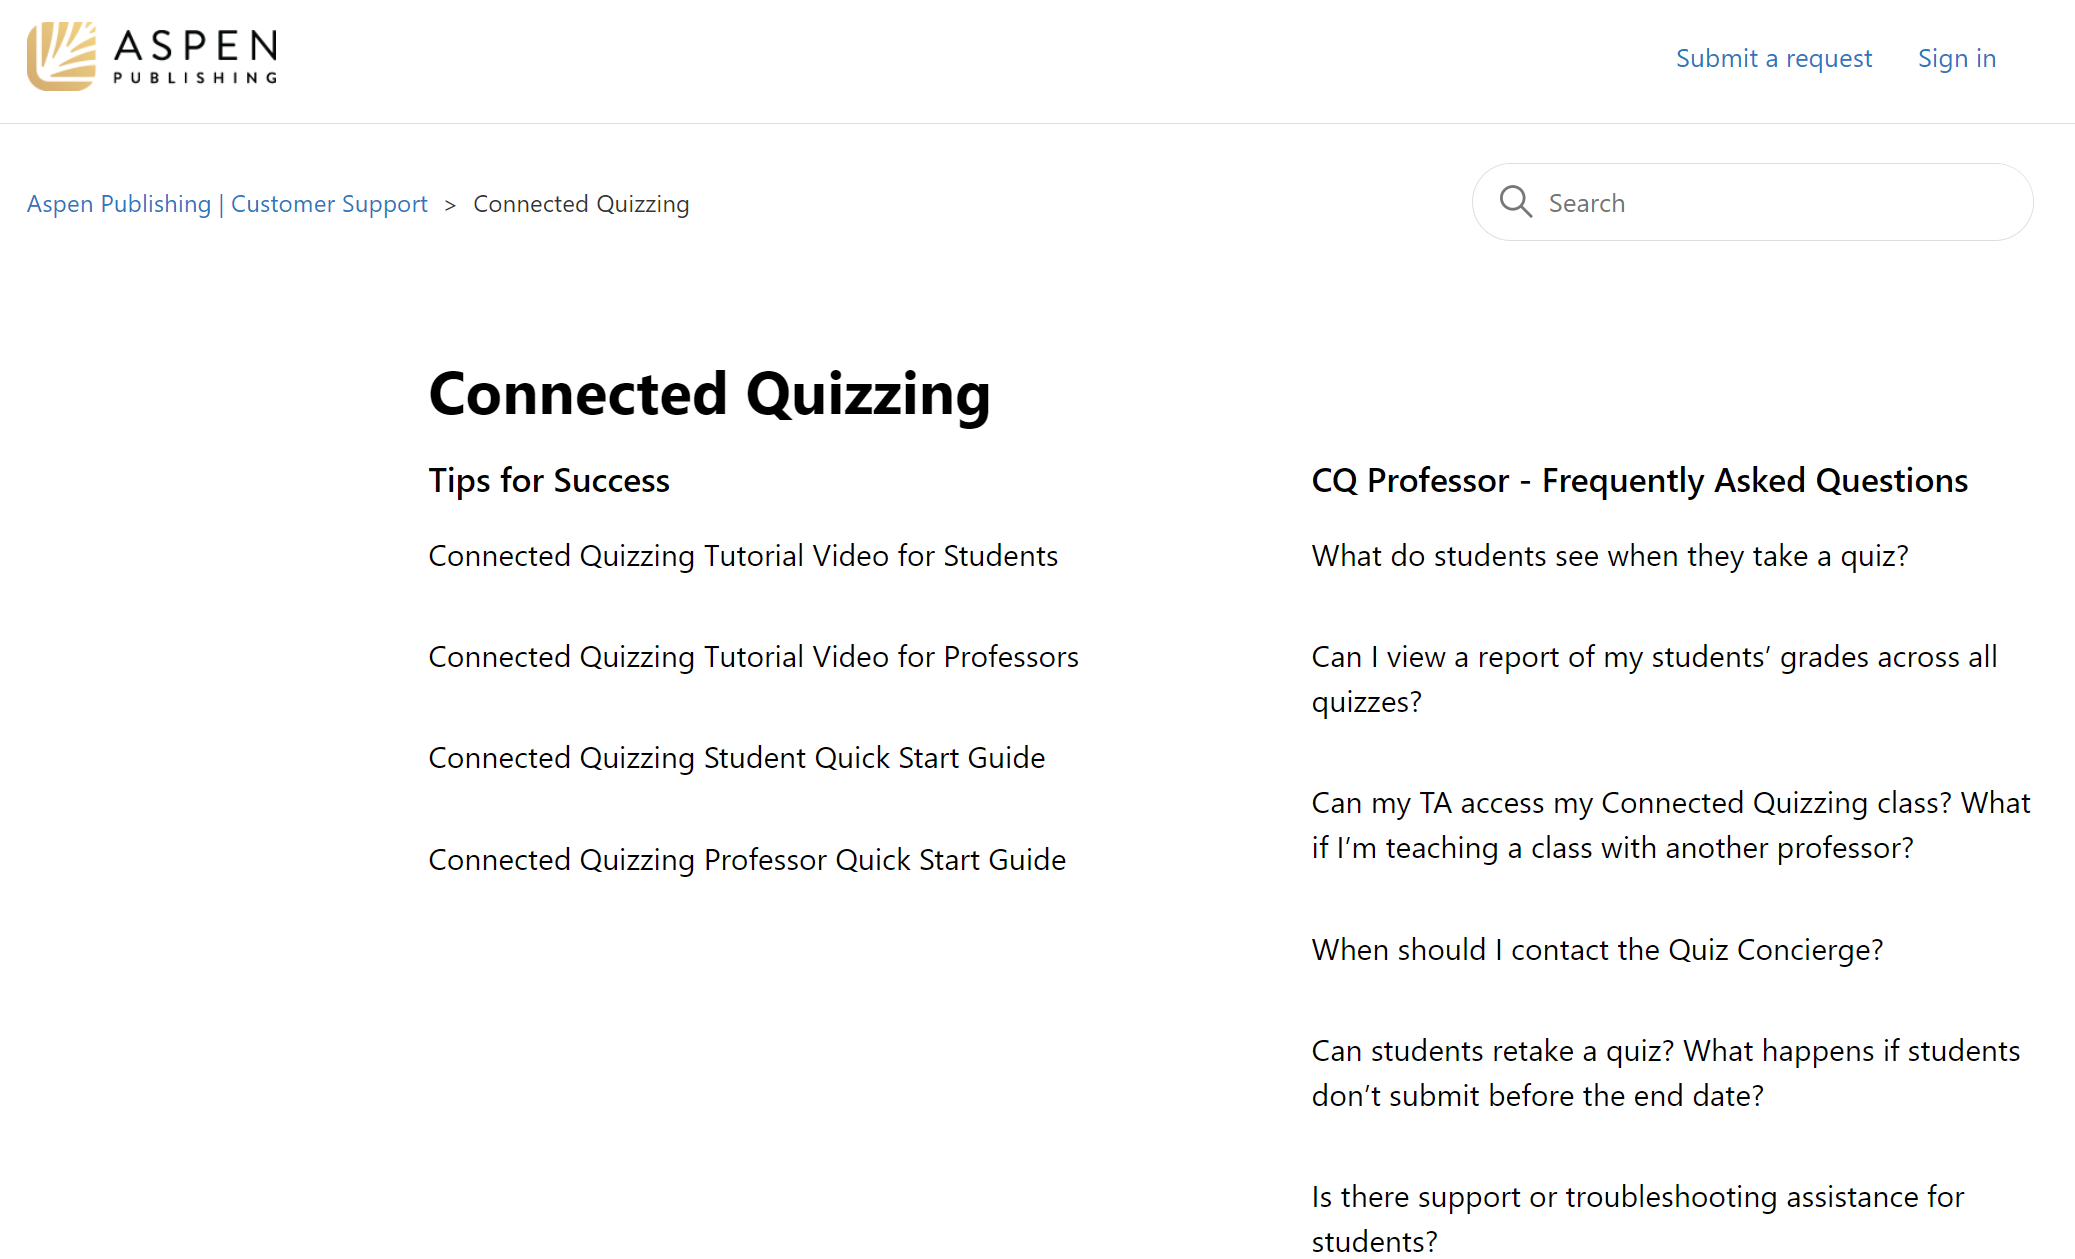 Connected Quizzing FAQs image